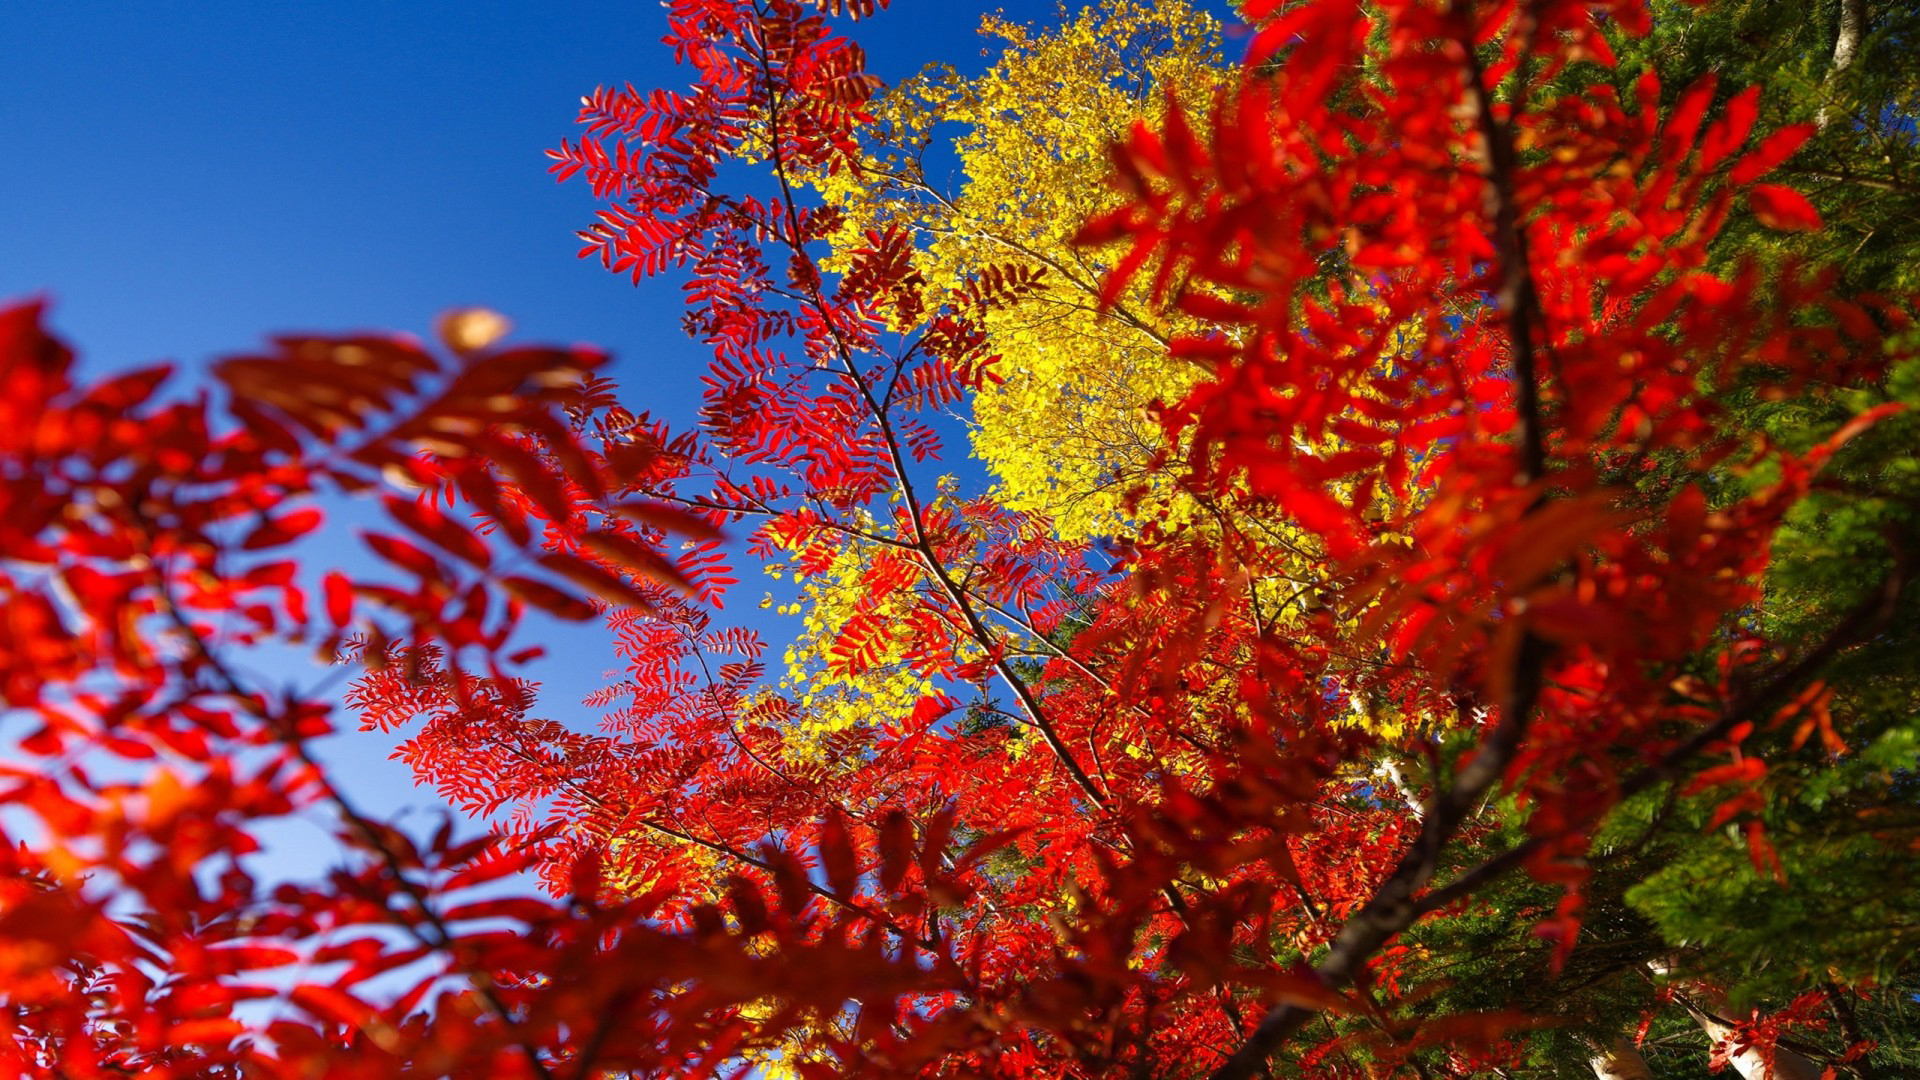 Red Yellow Green Autumn Fall Trees Leaves Branches Under Blue Sky 2K Fall